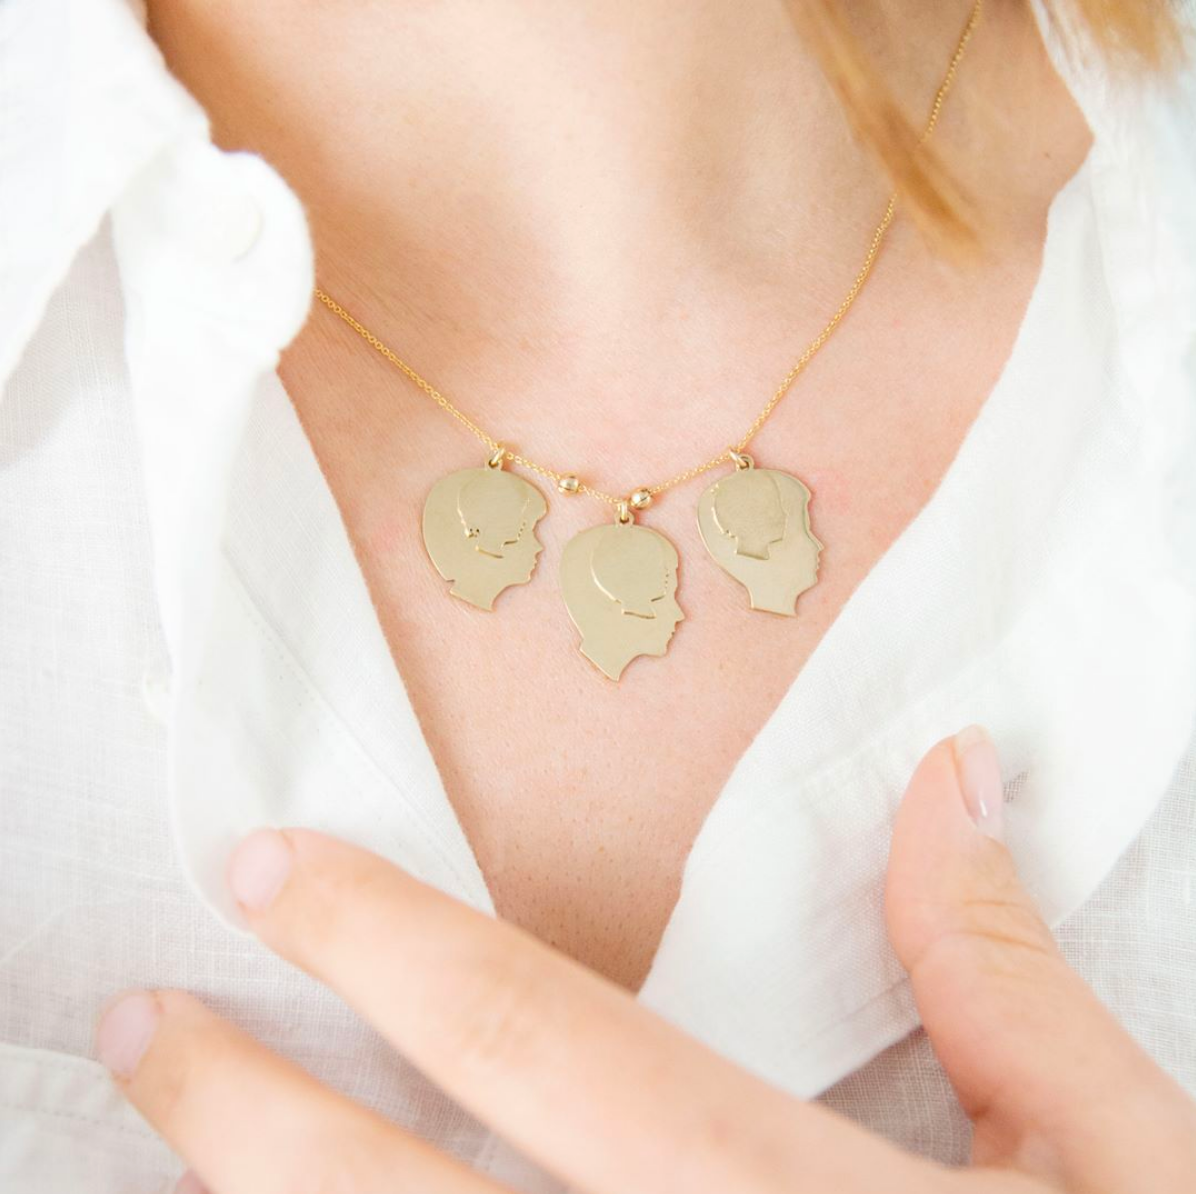 5 Reasons why you should invest in heirloom jewelry + how to get started